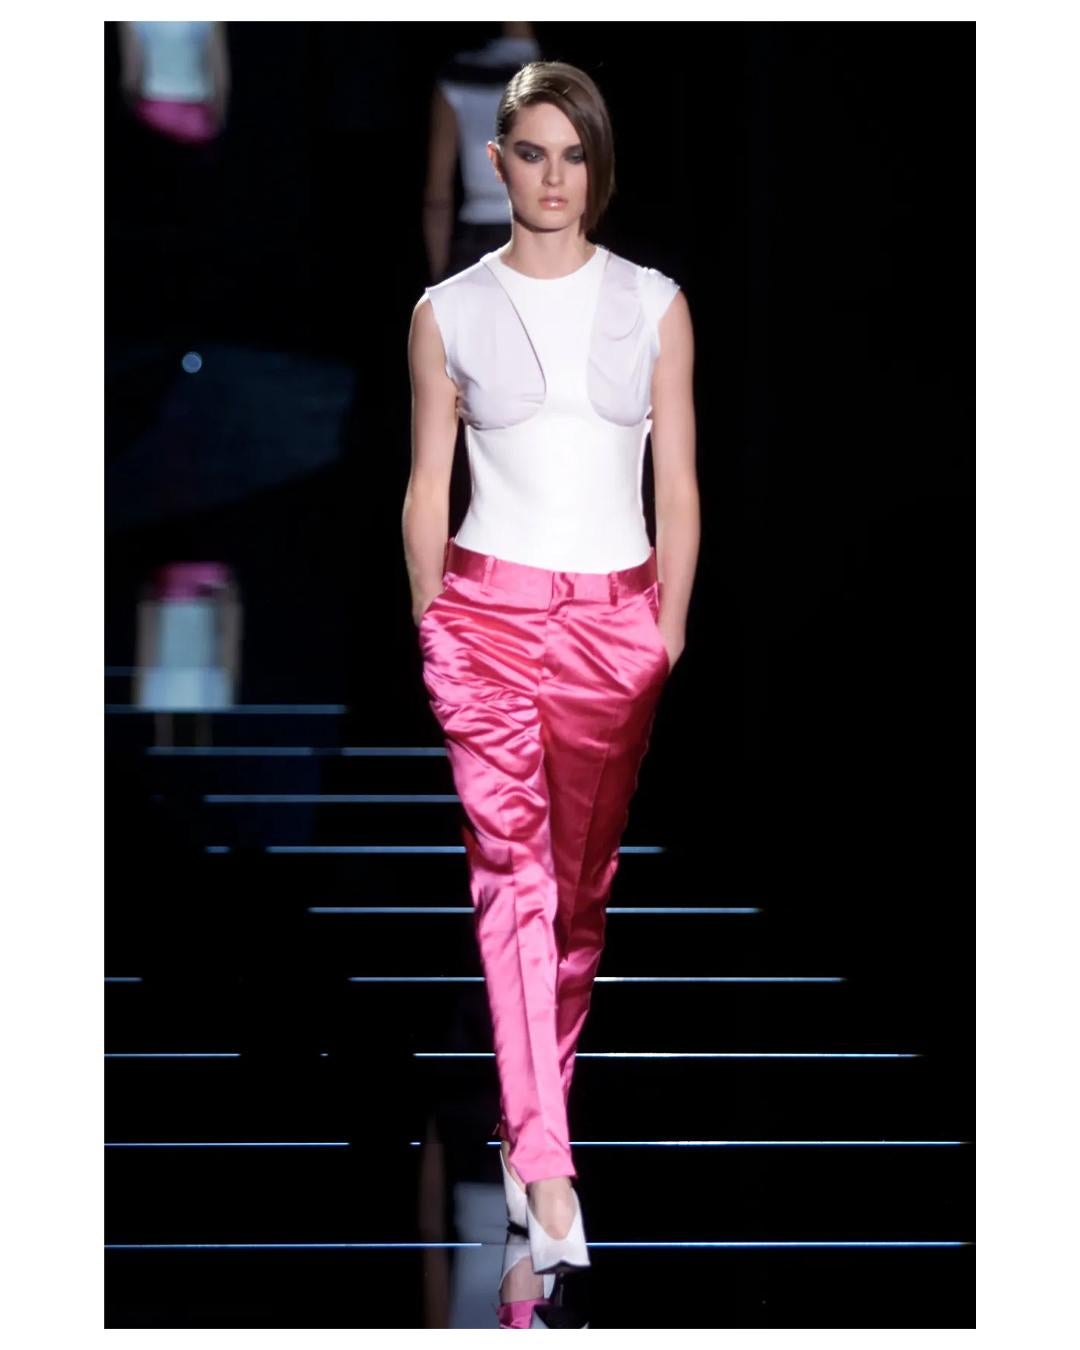 LOVE LALI Vintage

Gucci by Tom Ford Fall 2001 hot fuchsia pink tapered dress pants with a low rise waist in silk
Belt loops
Creases
Two front pockets 
Ankle zips with Gucci engraved zipper pulls
The pants sit quite long due to the fact they are low